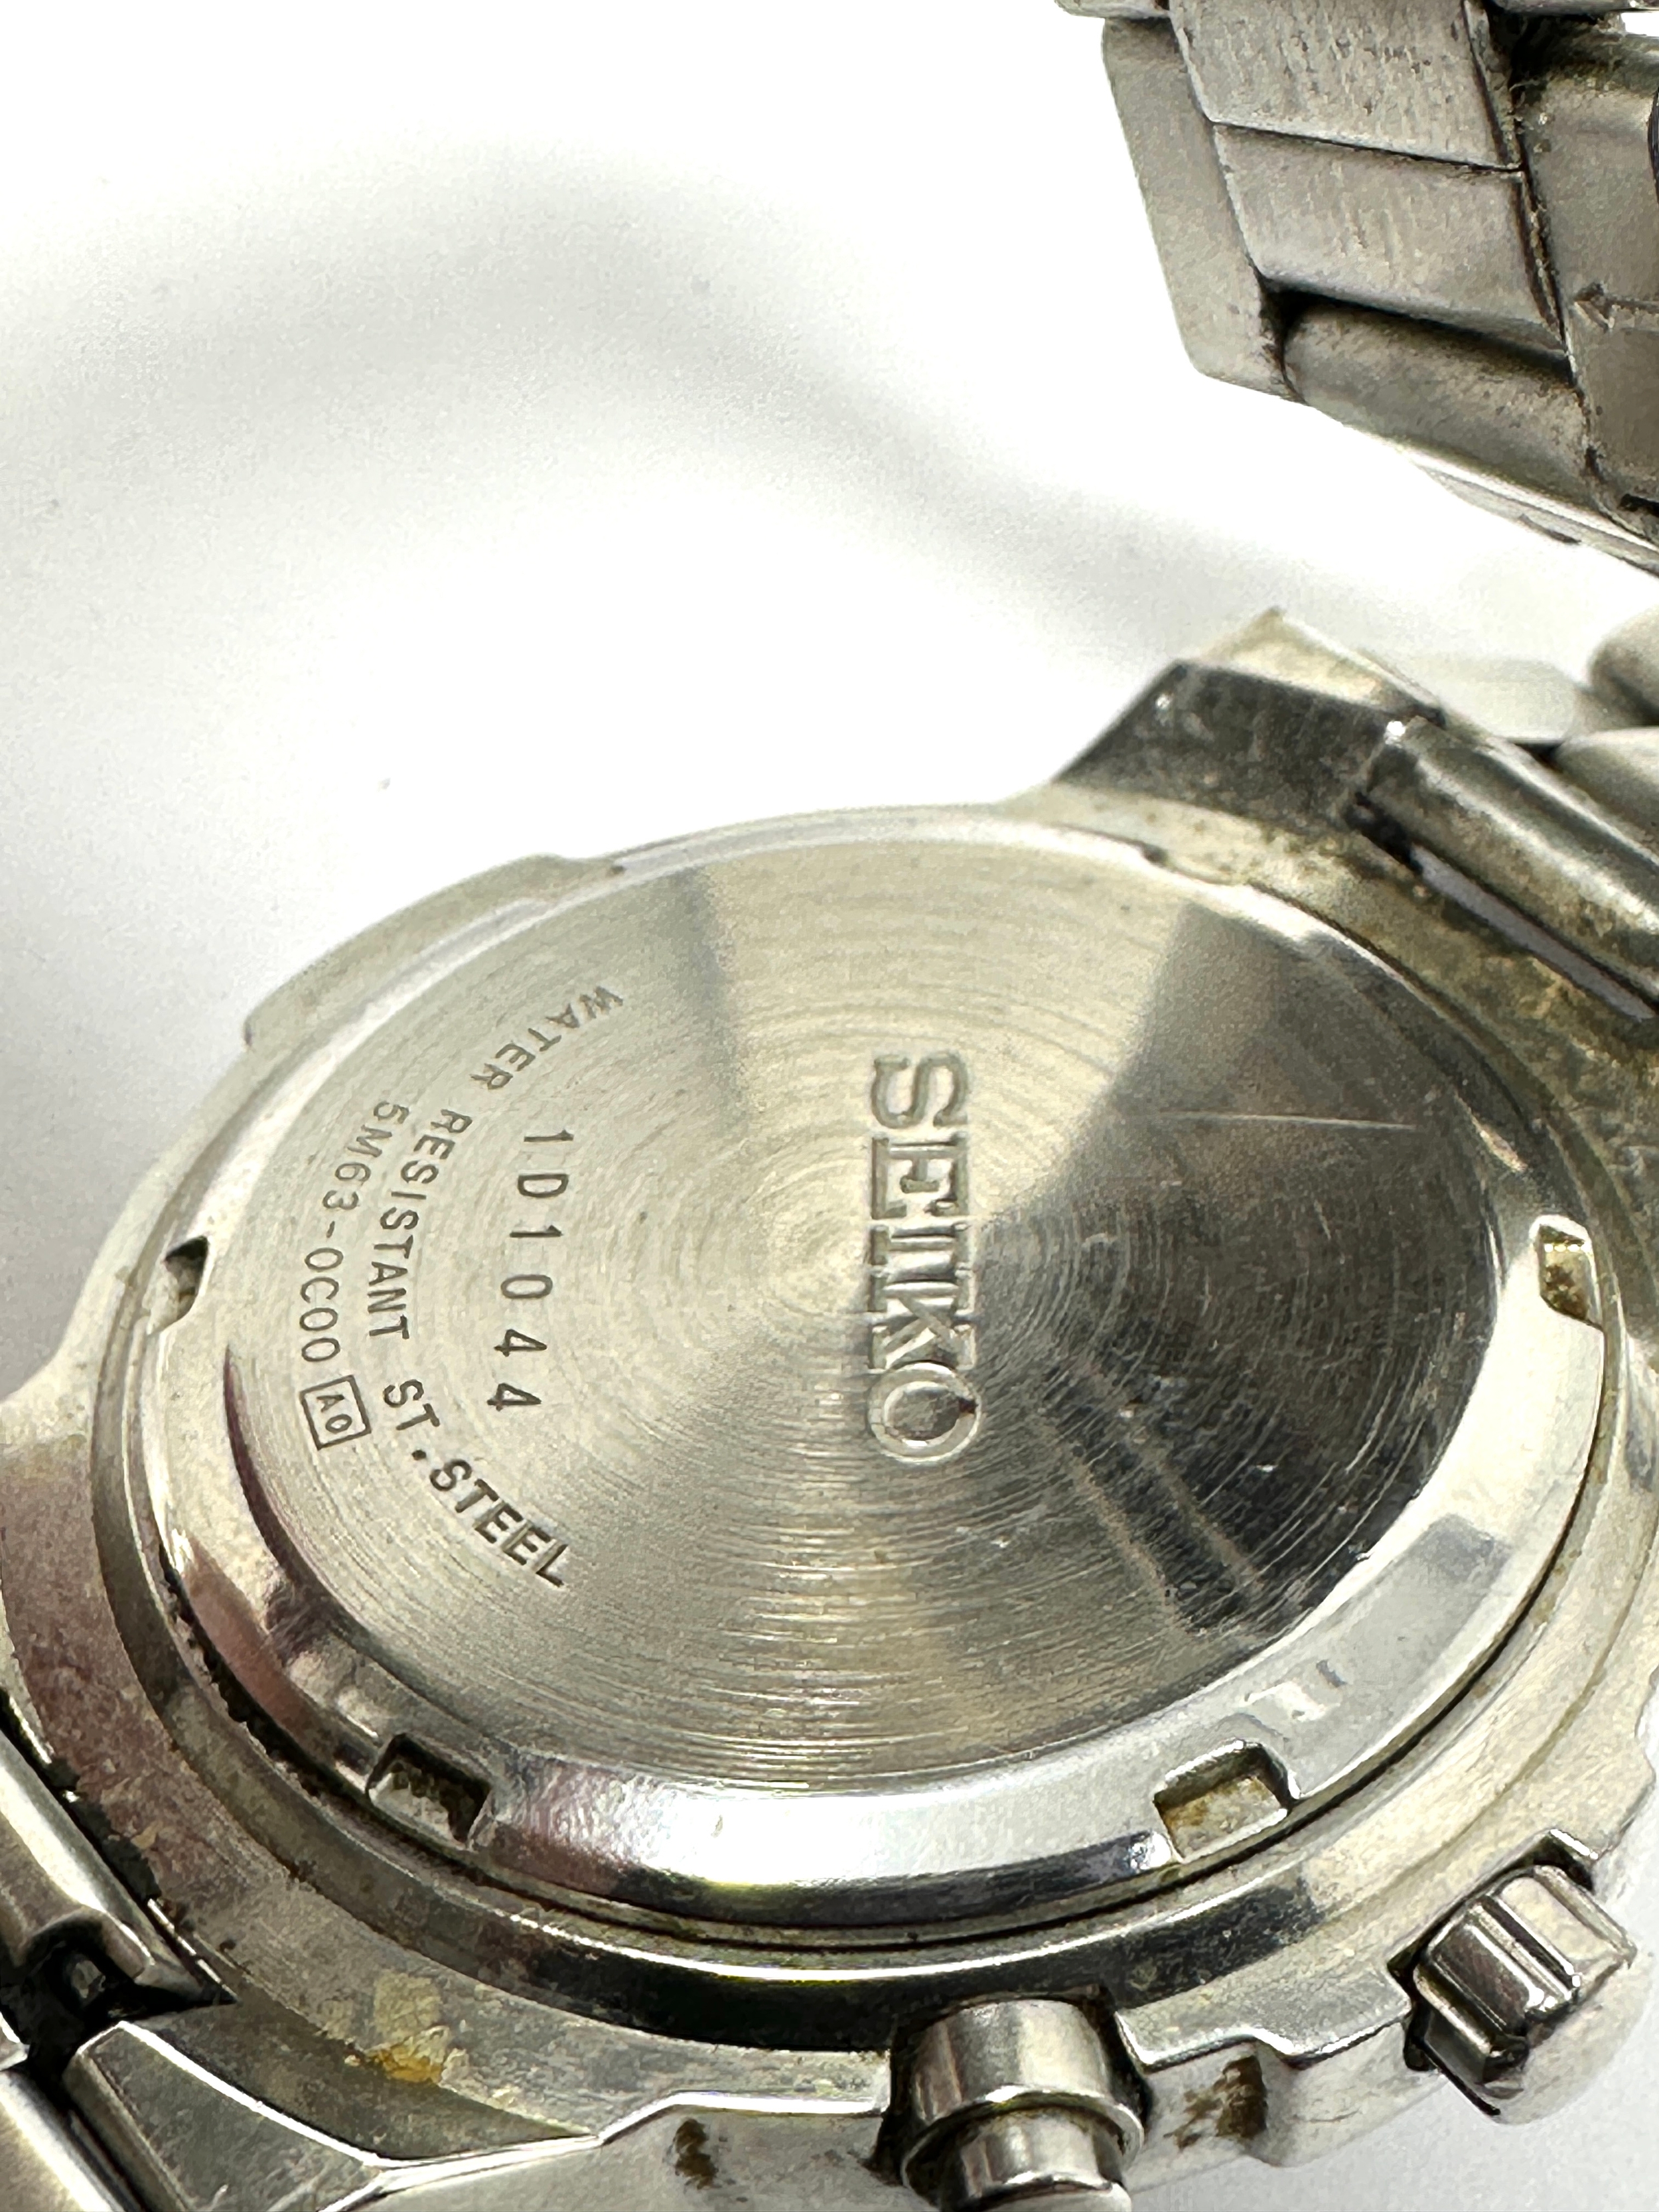 Seiko kinetic gents wristwatch 5m63-0c00 the watch is ticking - Image 4 of 4